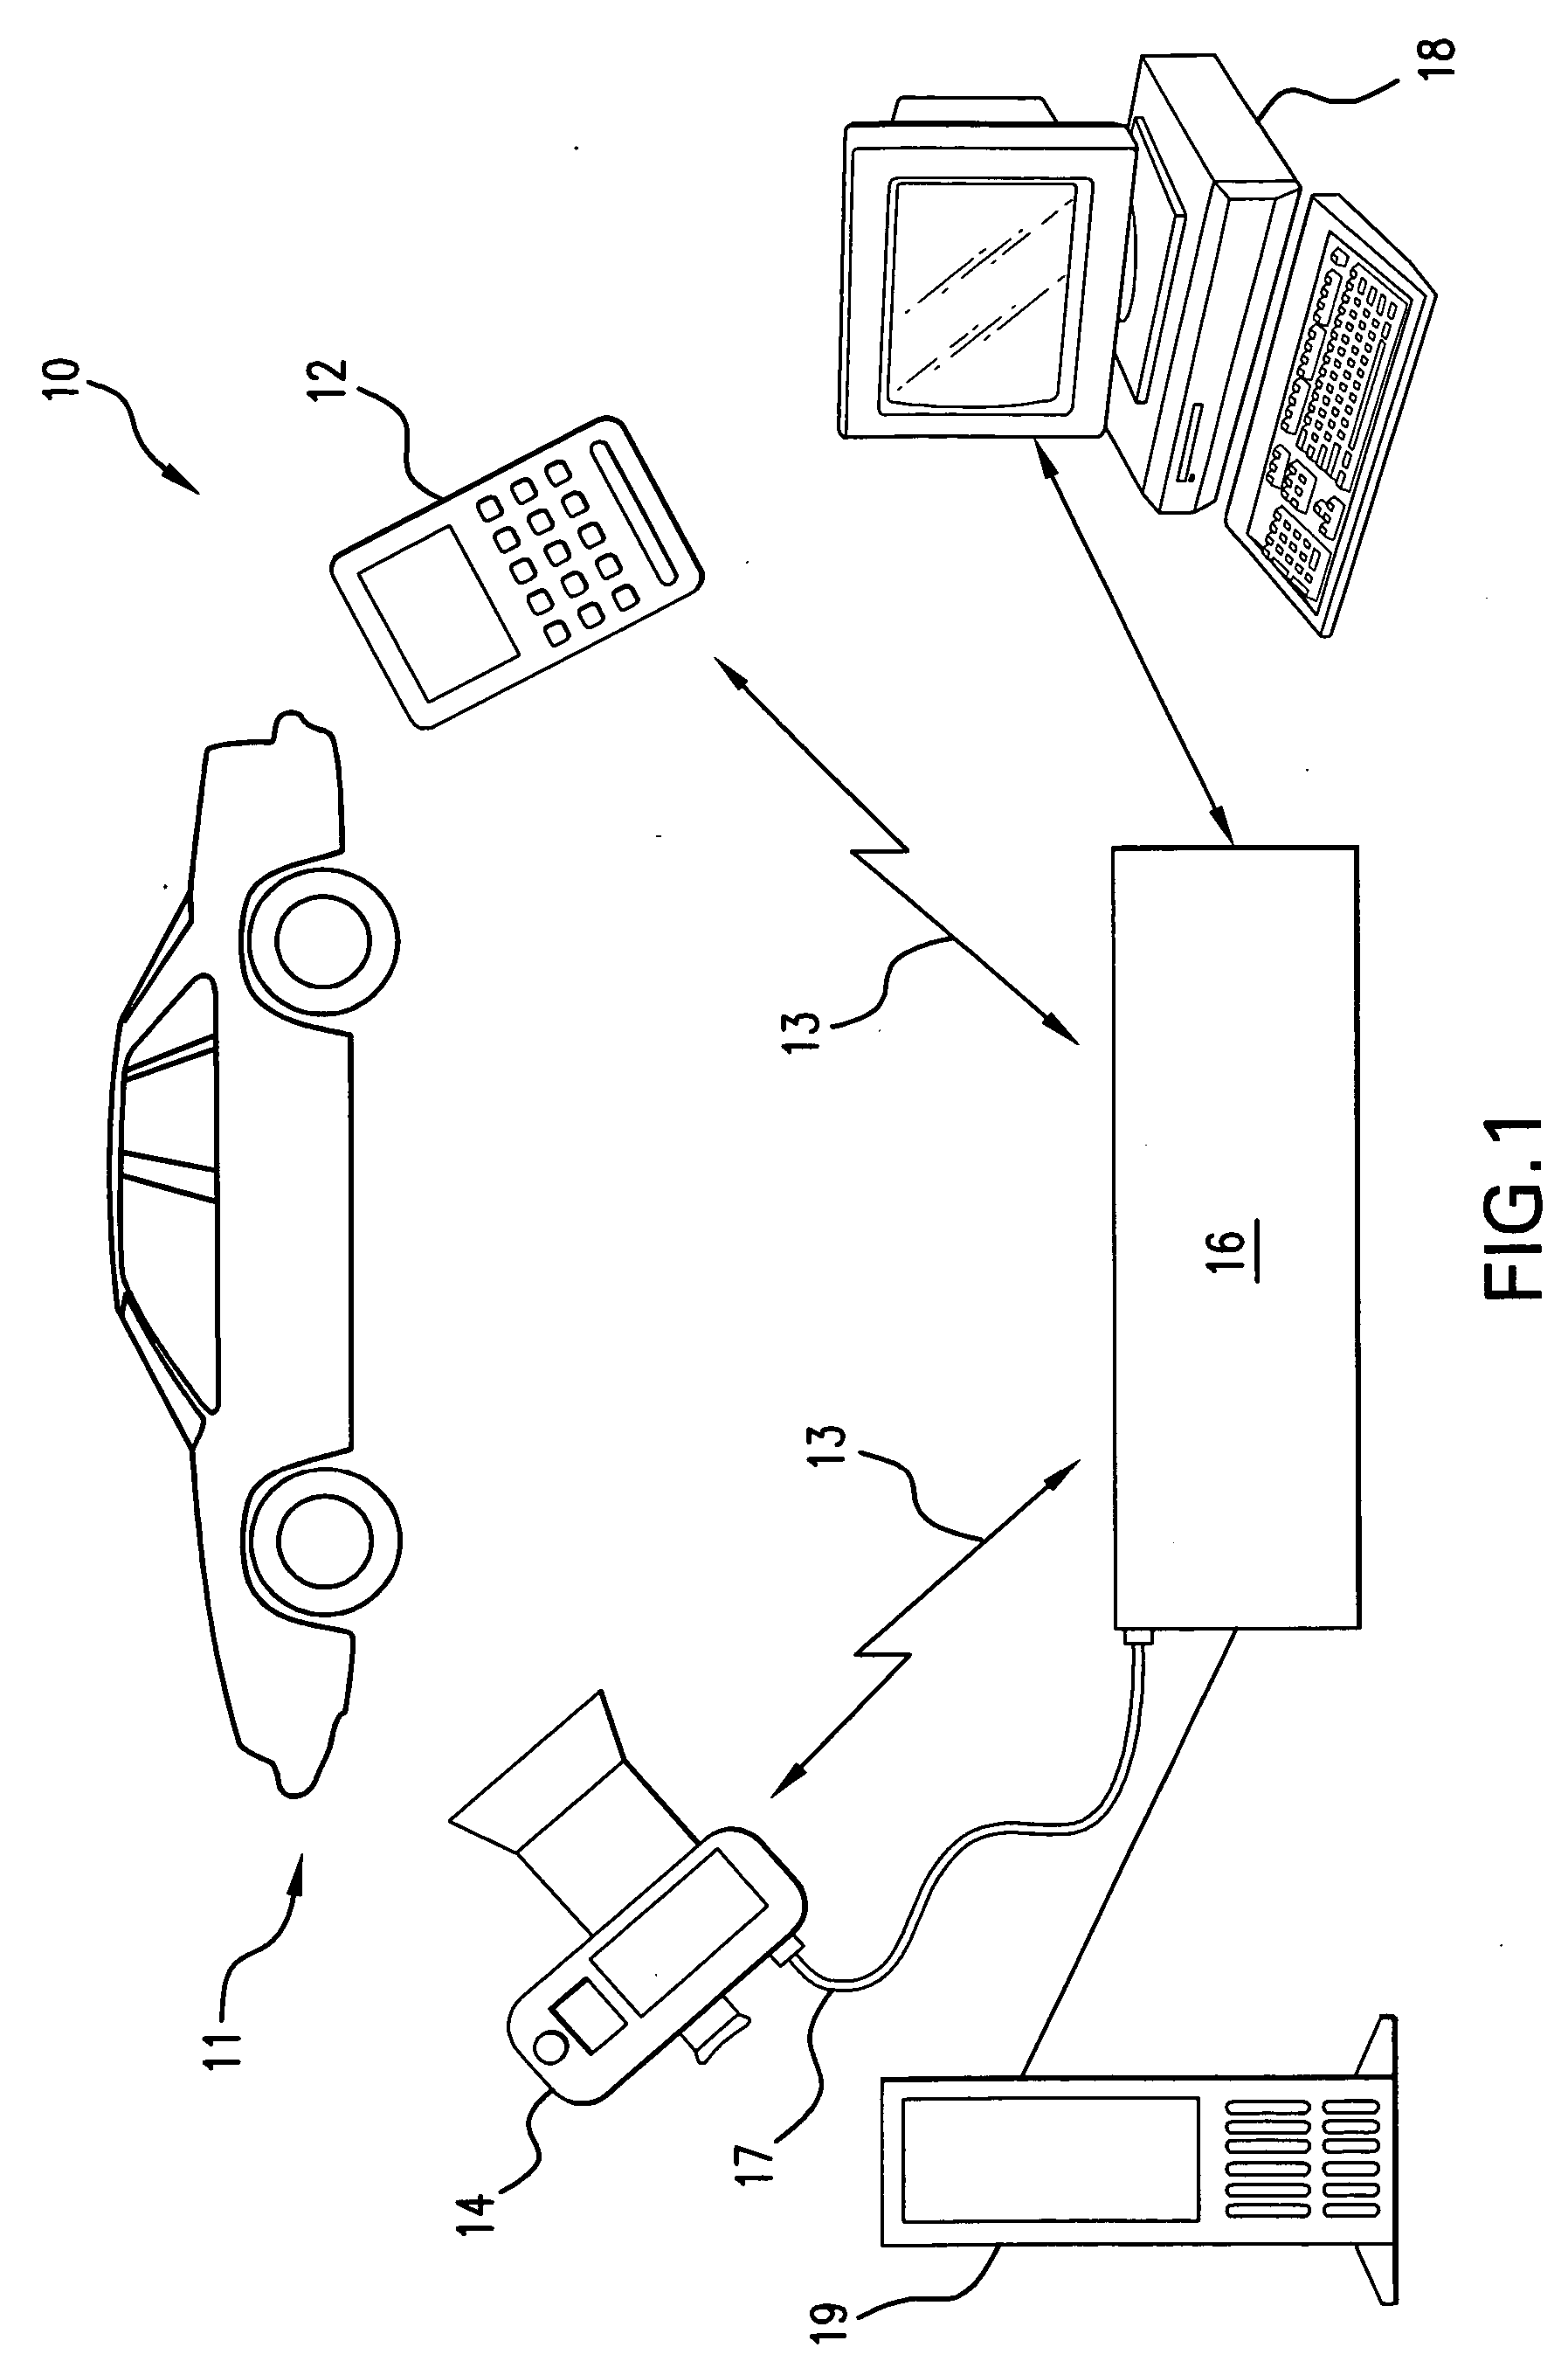 Automated vehicle check-in inspection method and system with digital image archiving